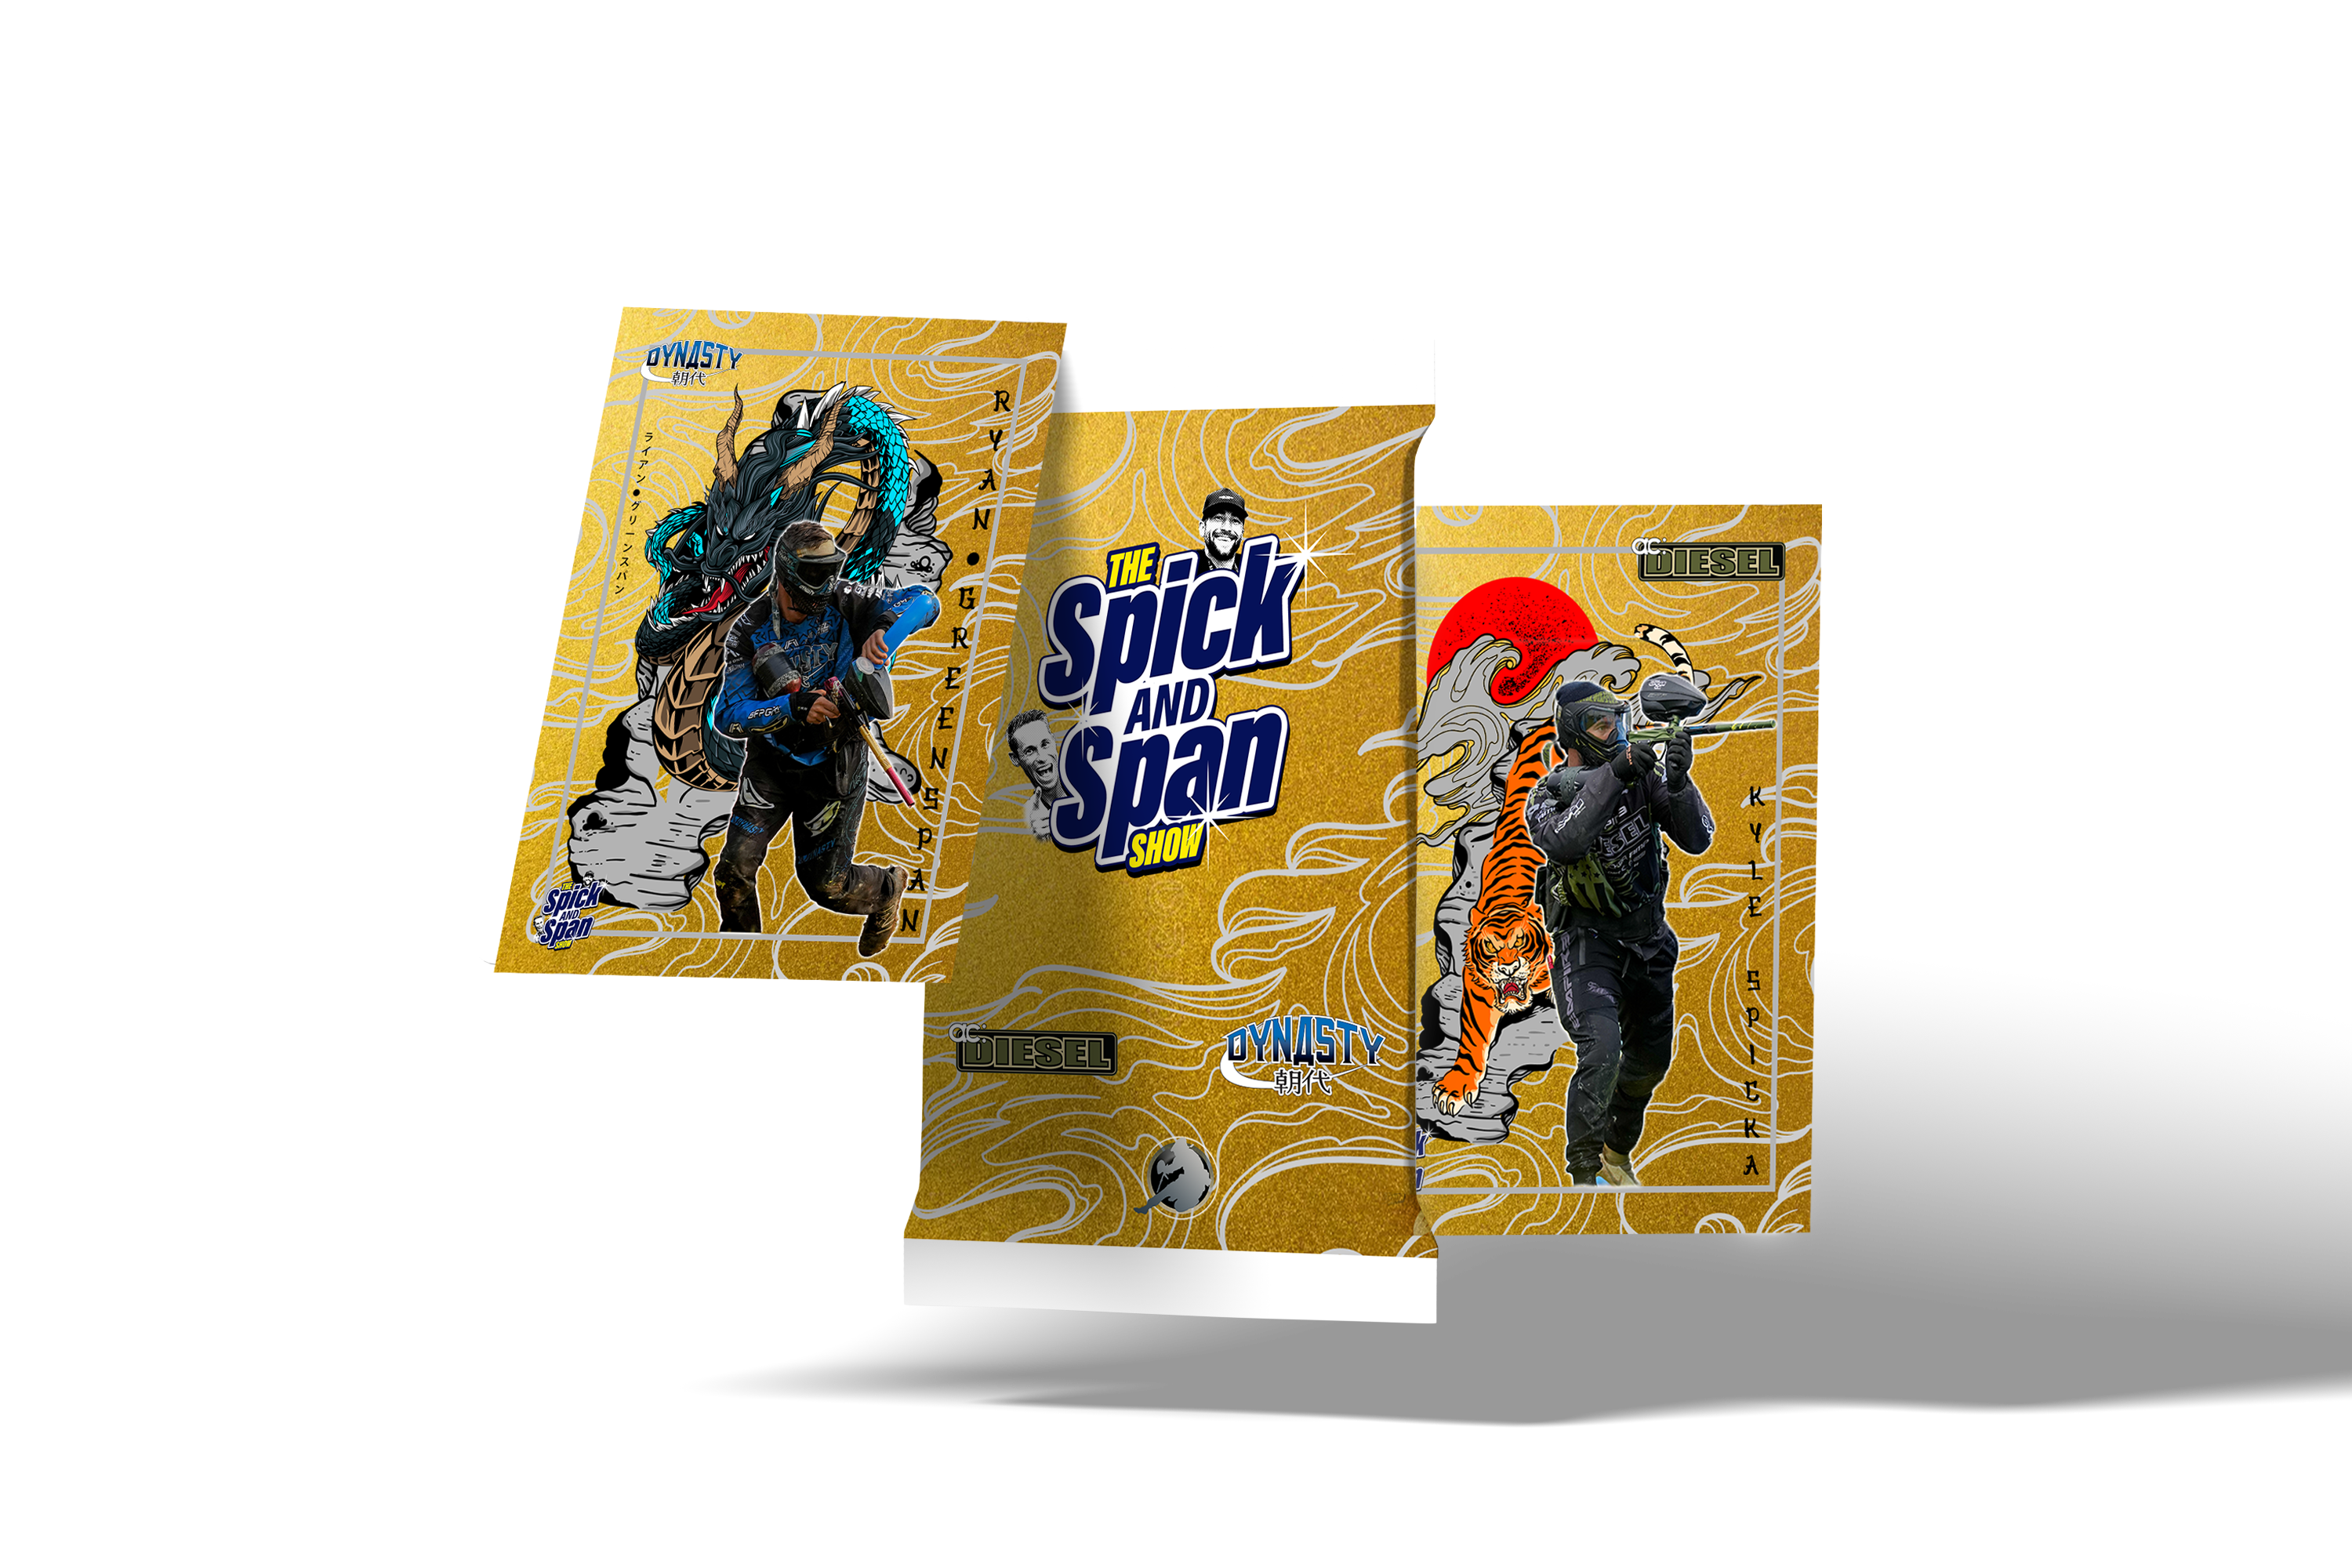 Limited Edition Spick and Span Gold Collectible Card Pack